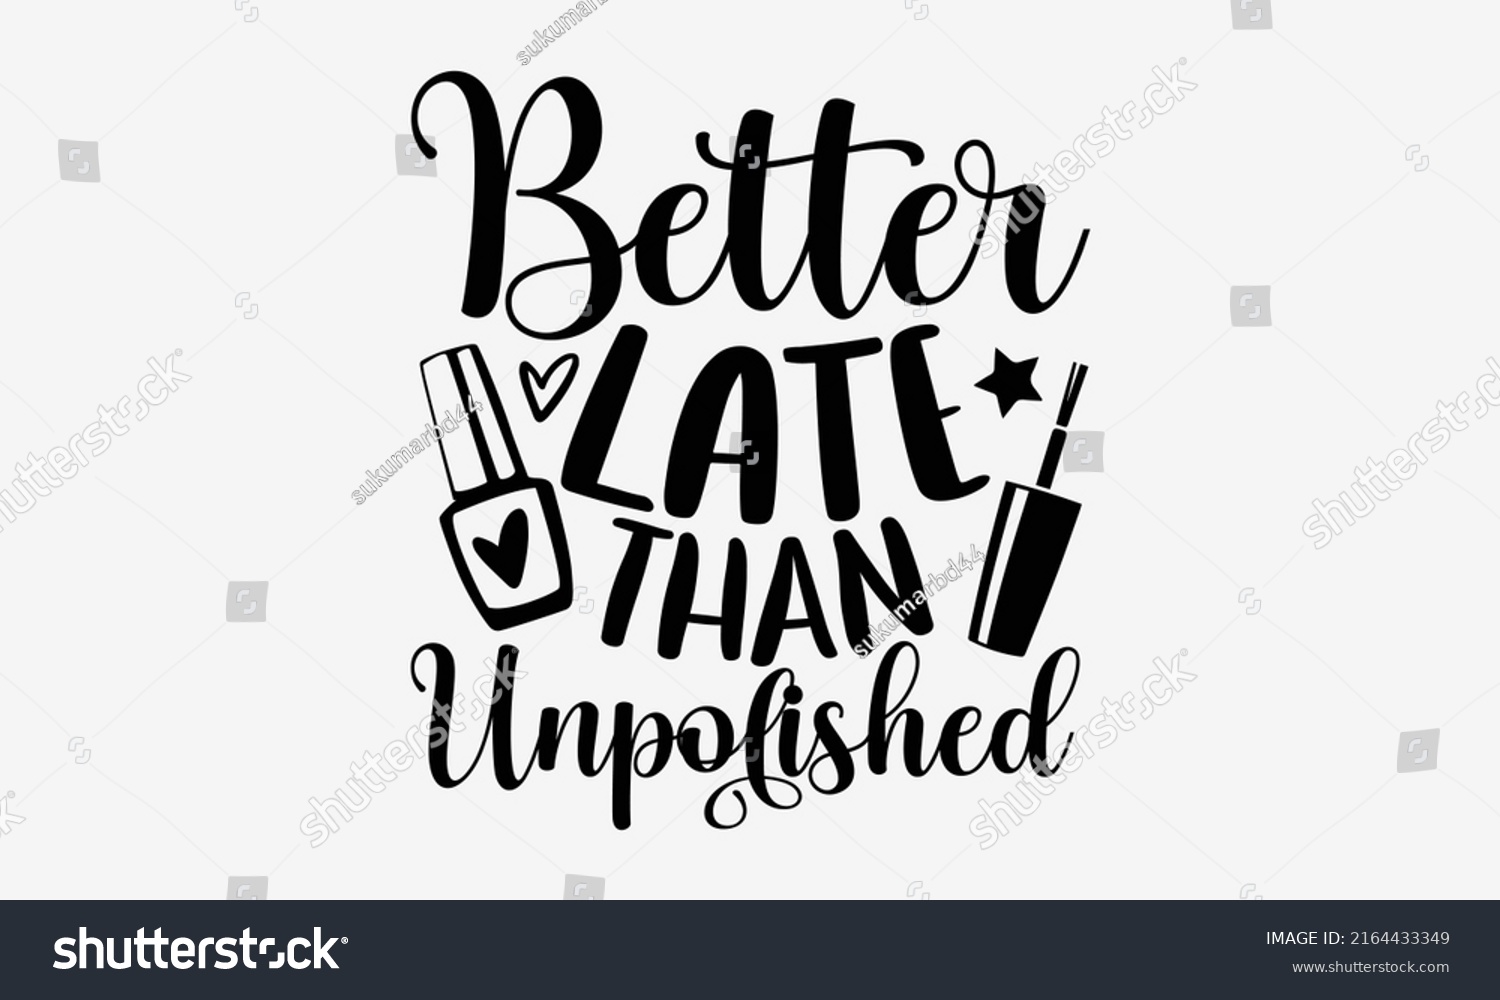 SVG of Better late than unpolished - Nail Tech t shirt design, Hand drawn lettering phrase, Calligraphy graphic design, SVG Files for Cutting Cricut and Silhouette svg